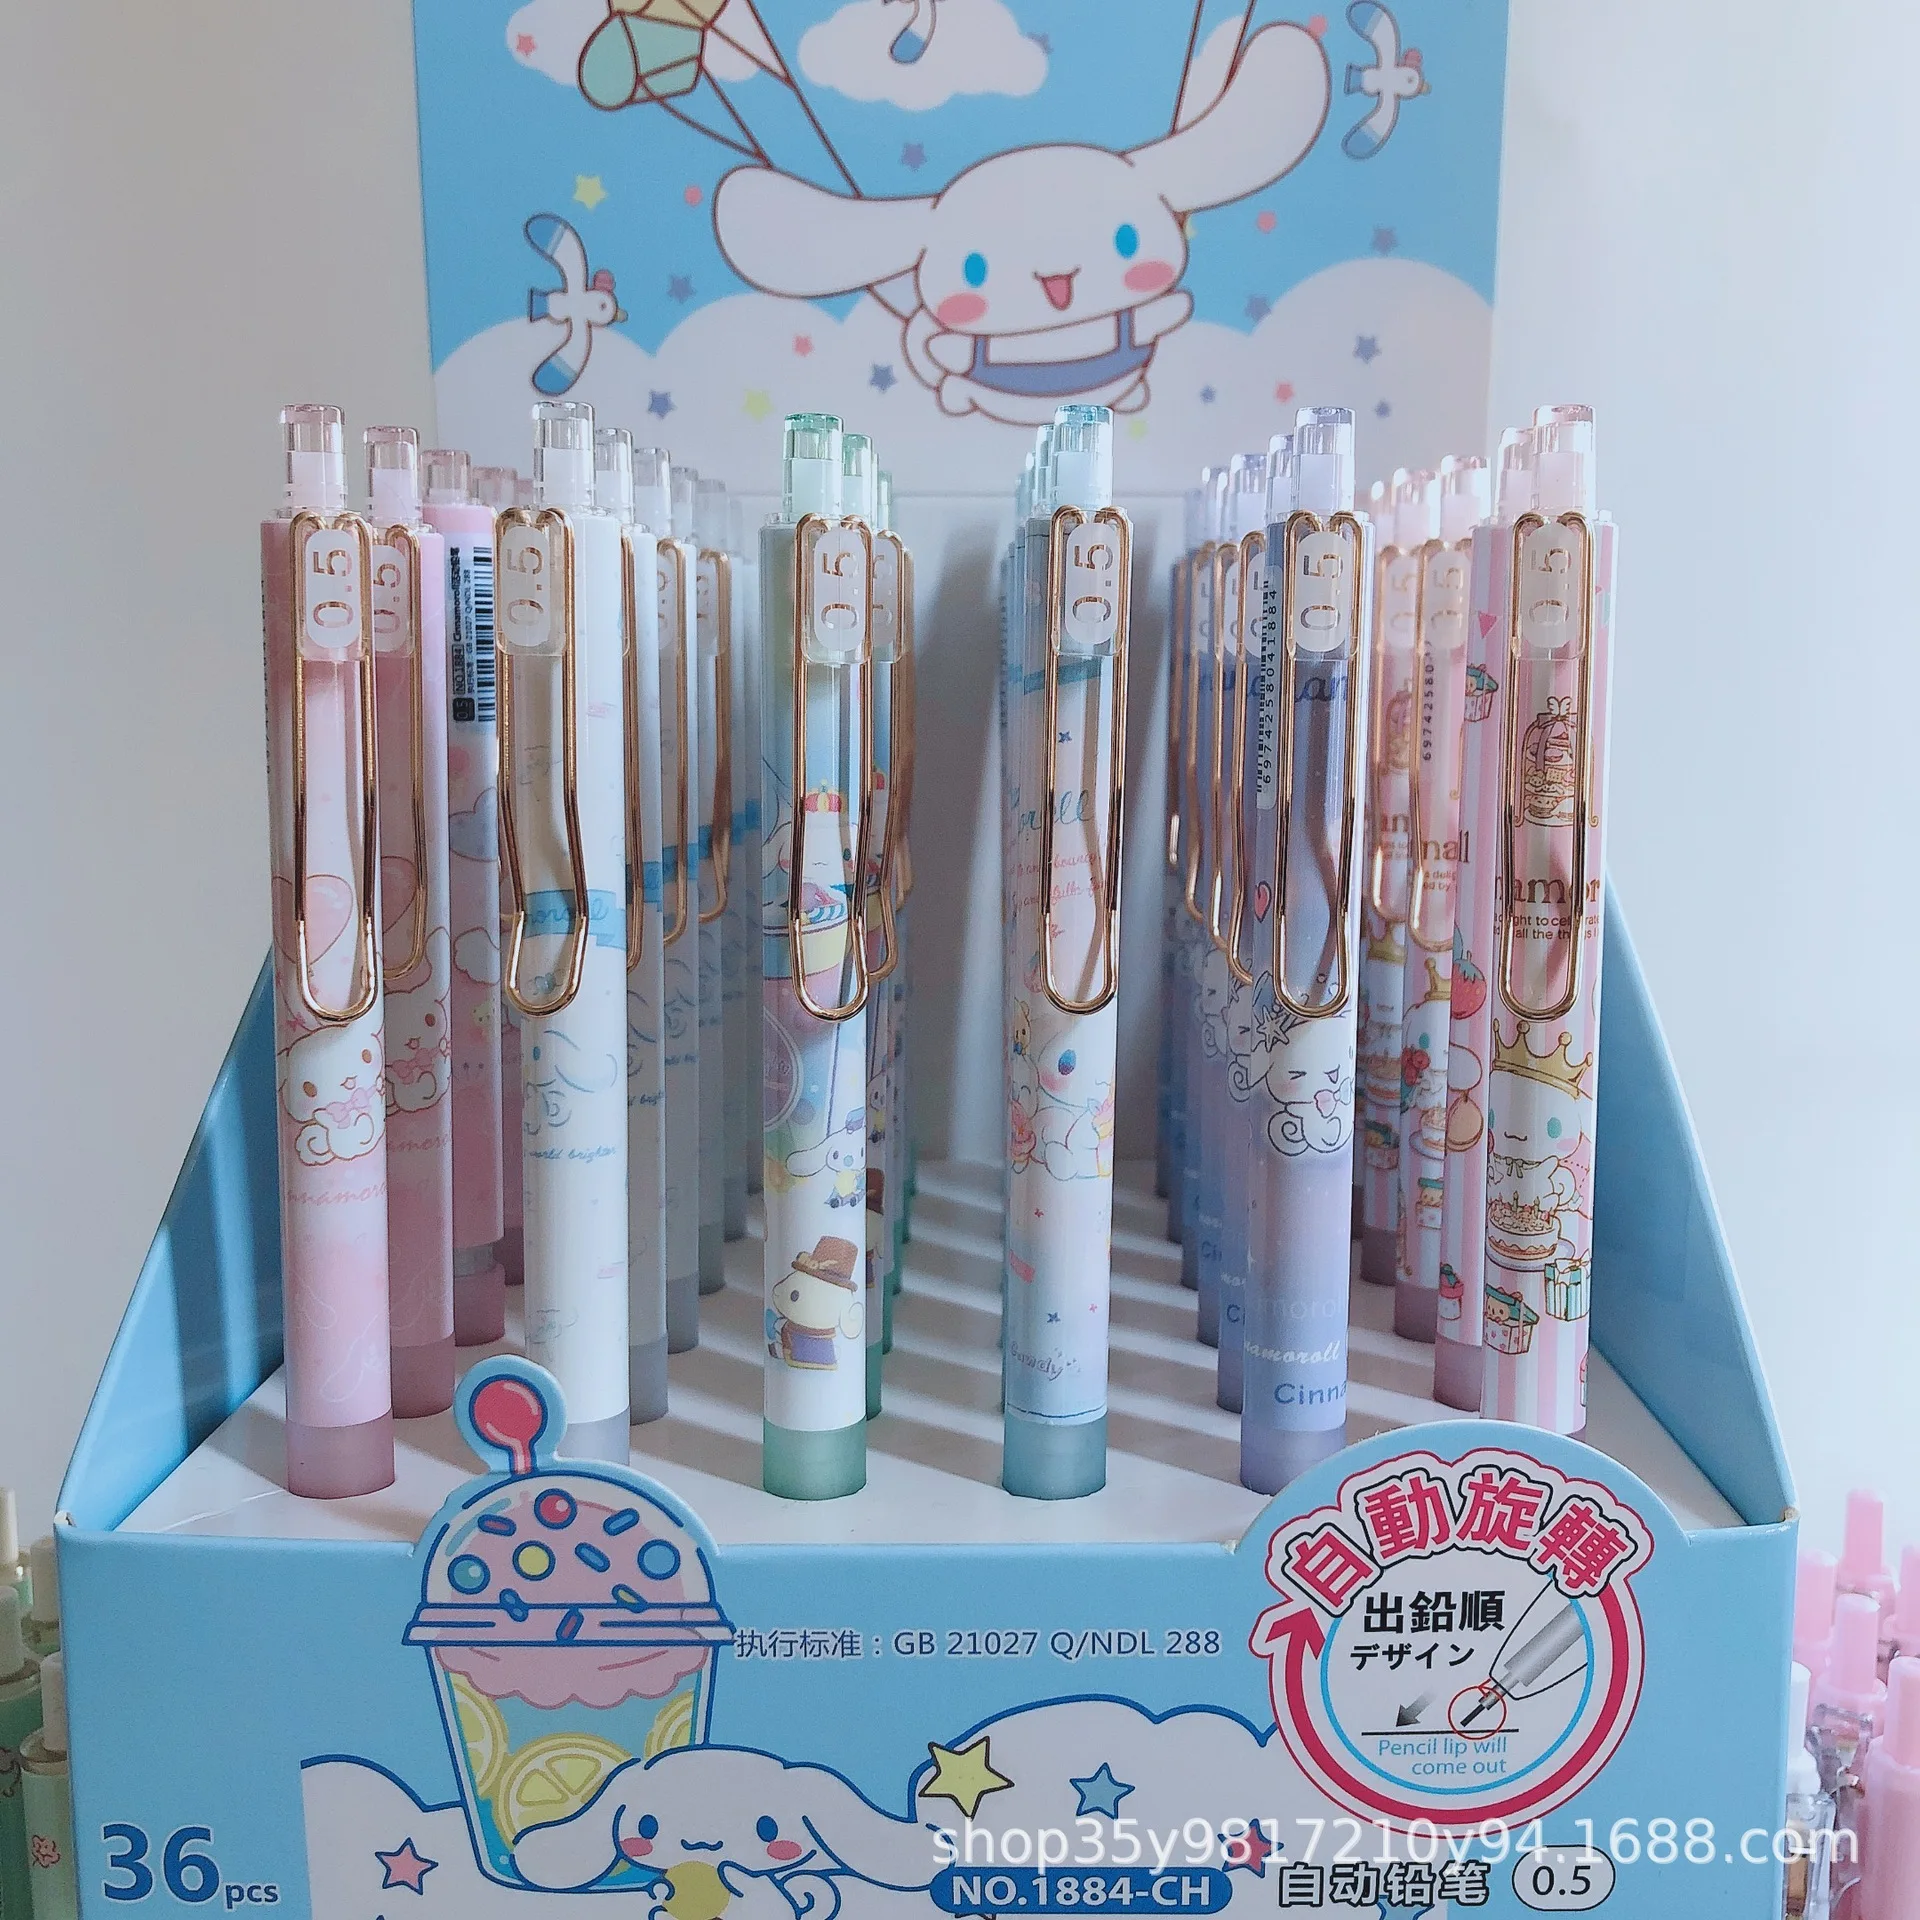 Sanrio neutral pen kawaii Cinnamoroll series cartoon touch pen lovely student stationery school supplies children's gifts 60pcs lovely kawaii fluorescent simulation syringe watercolor pen highlighters marker pen stationery school supplies